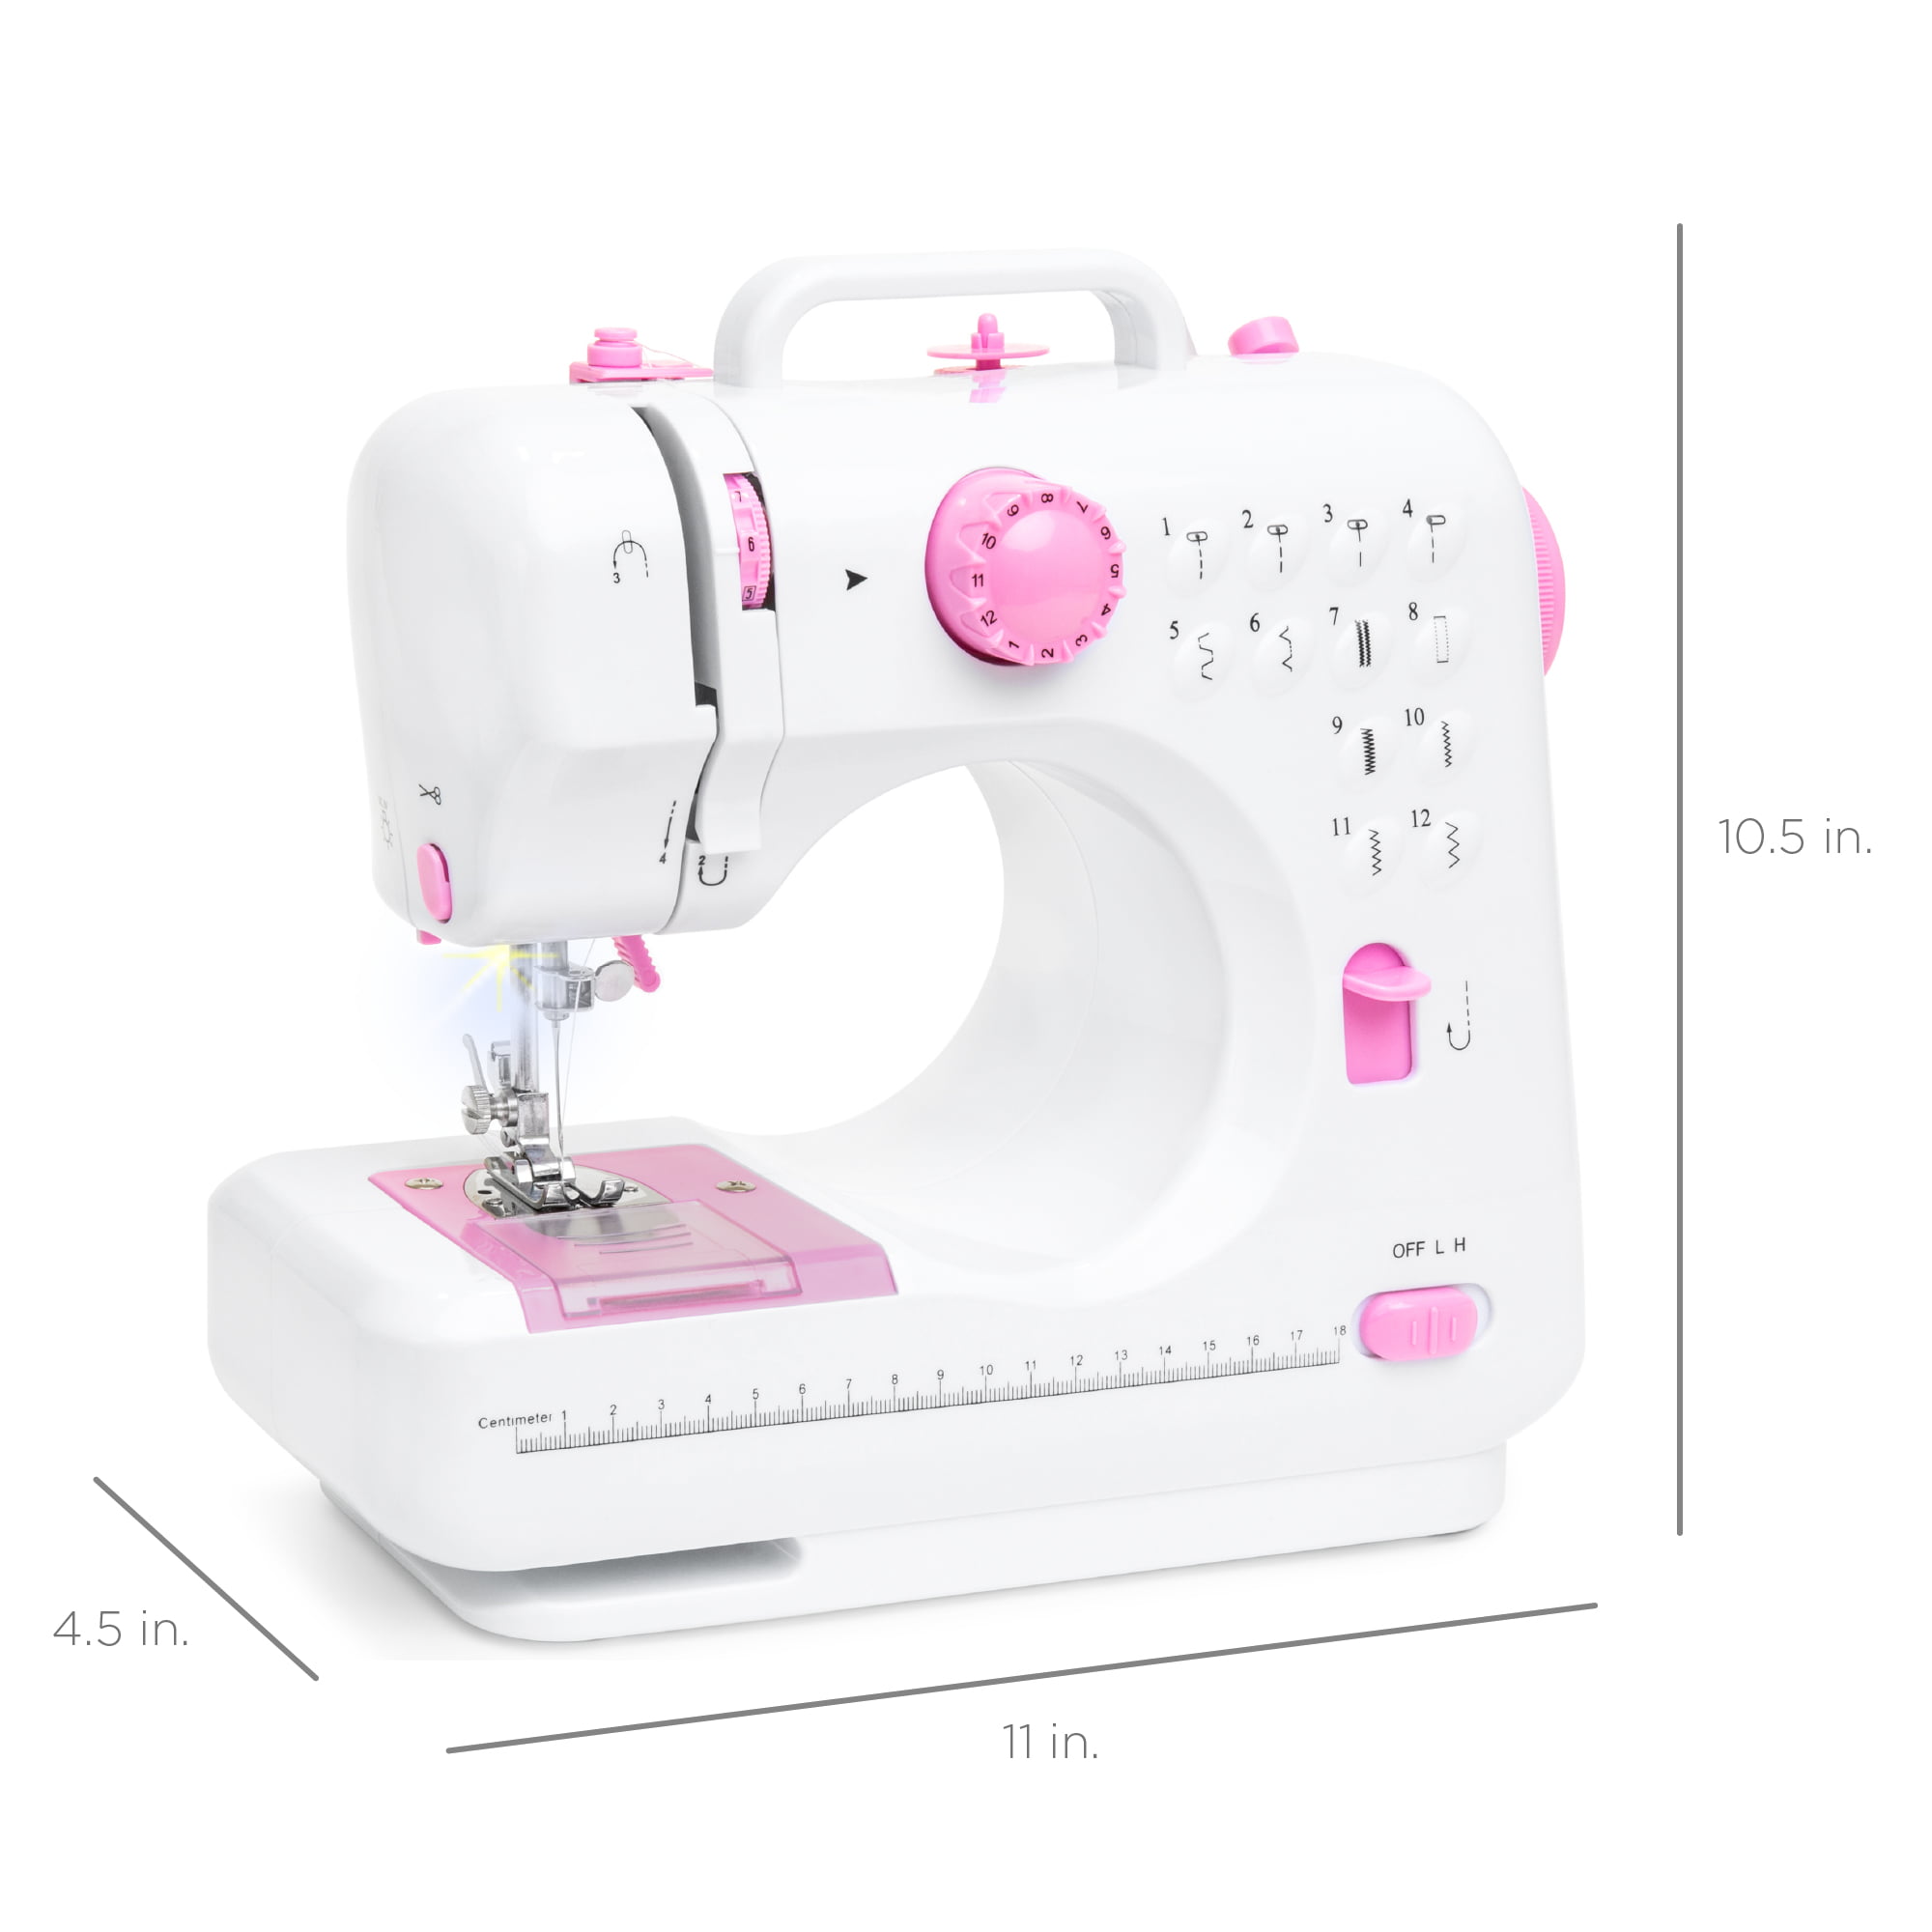 D'BestToys.com on Instagram: Made By Me Portable Sewing Machine